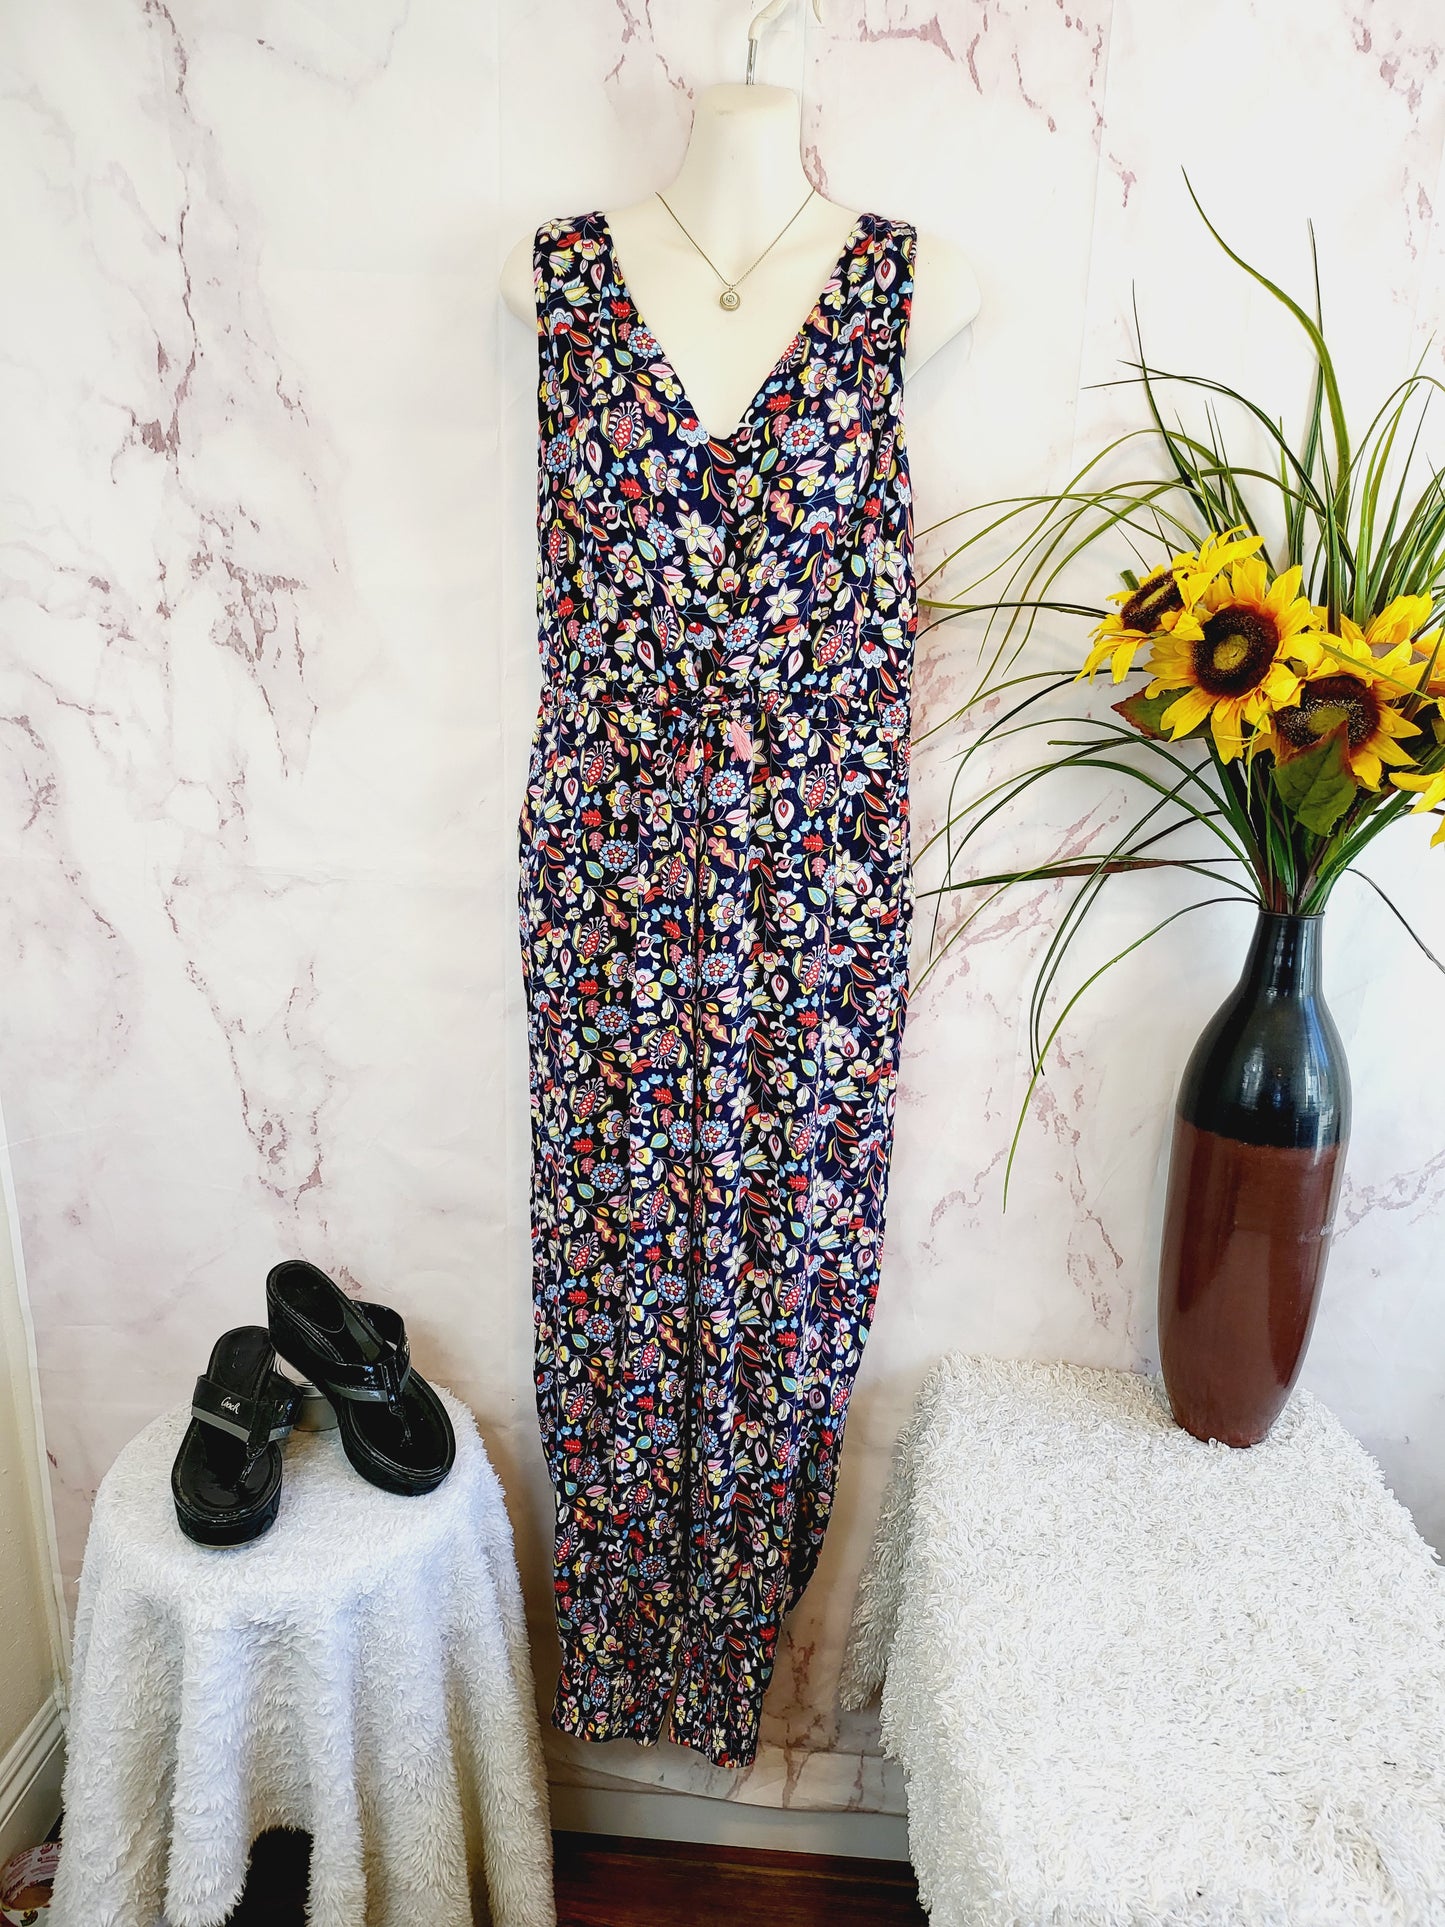 Boden Tie Waits Cecilia Jumpsuit - Floral - Navy Multi/Navy/Kaleidoscopic Floral - 12